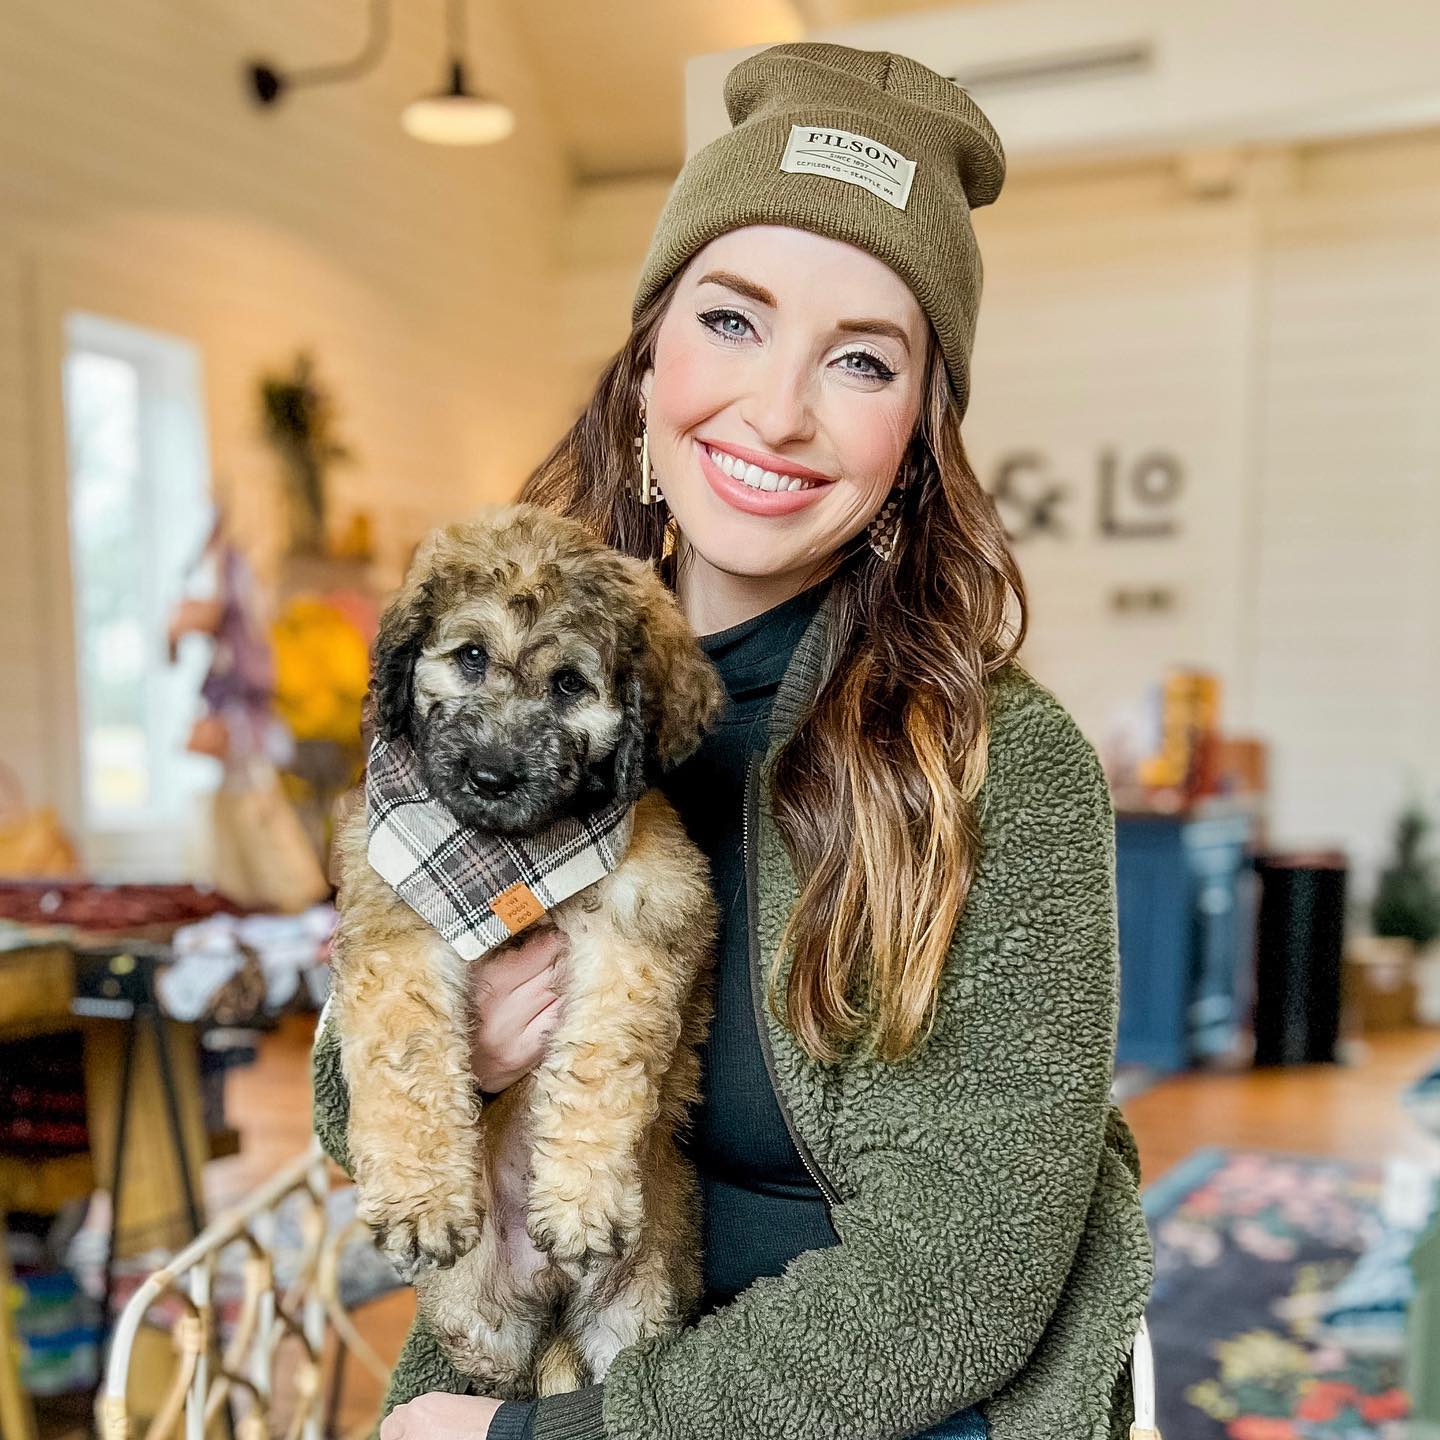 Taylor is pictured holding a golden doodle with a beautiful, unique color. This dog is definitely a rare find and is sure to be loved by anyone who meets it!